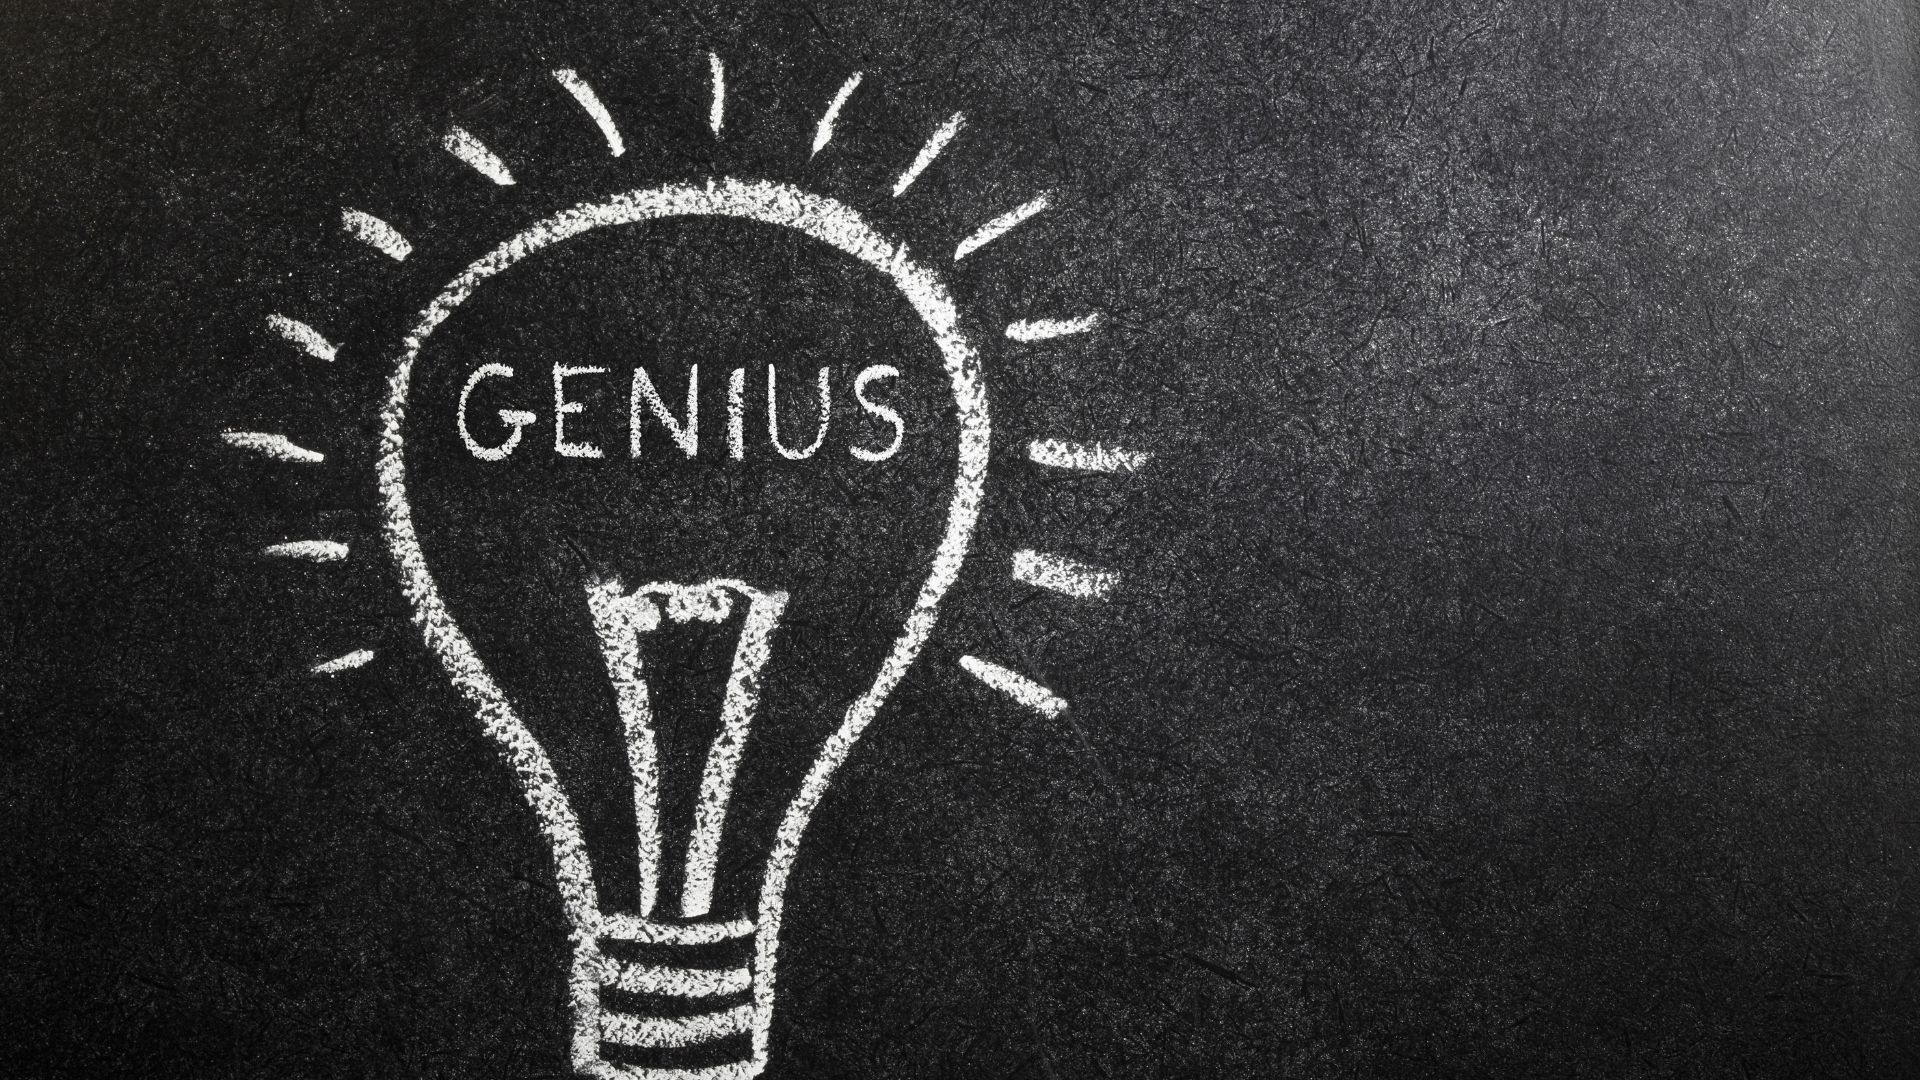 A Picture Showing the Word "Genius"